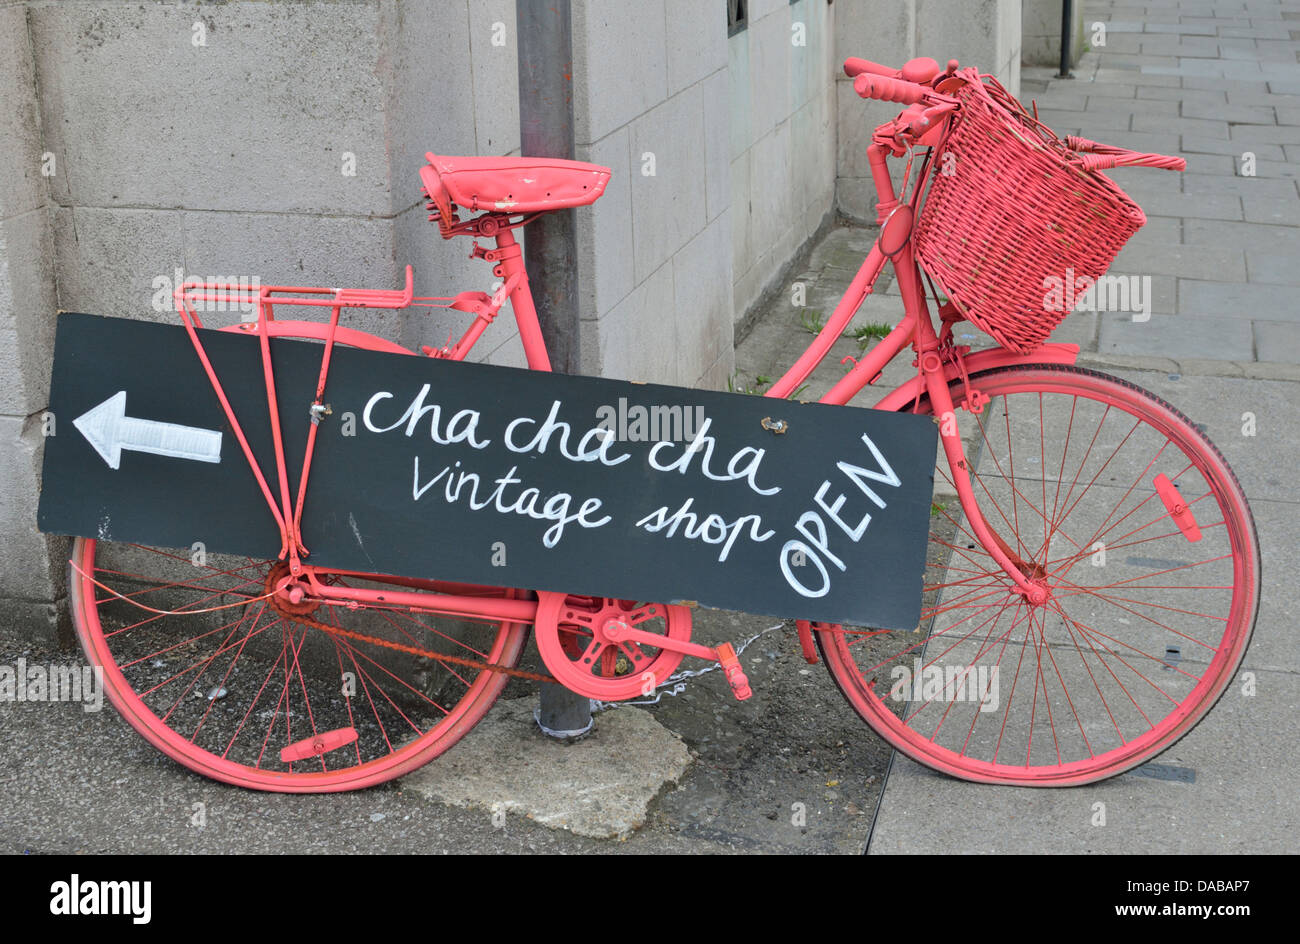 Bright pink bicycle advertising Cha Cha Cha vintage shop, Muswell Hill, London, UK Stock Photo